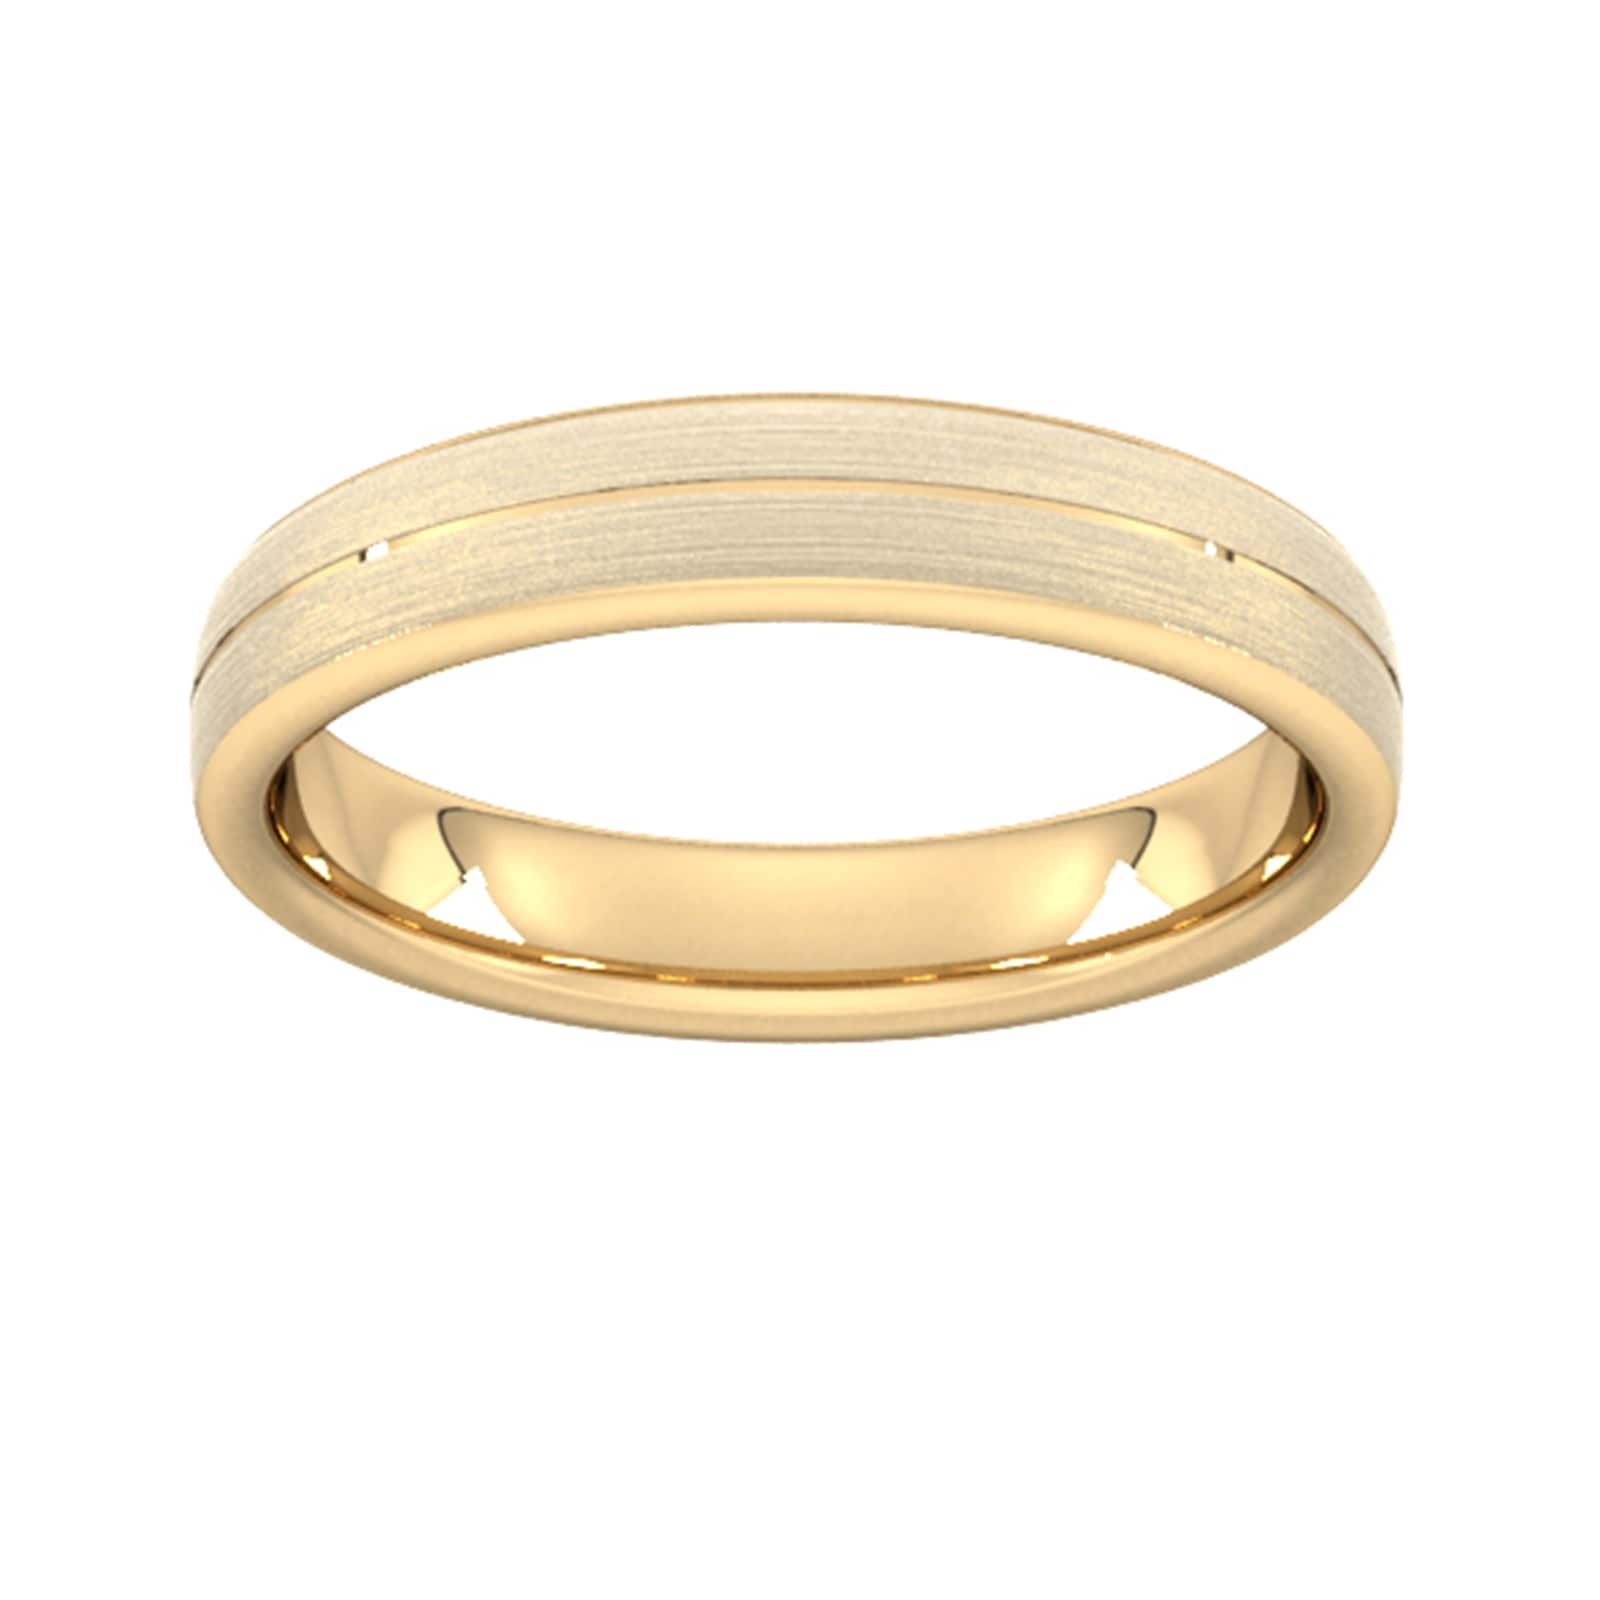 4mm Slight Court Heavy Centre Groove With Chamfered Edge Wedding Ring In 18 Carat Yellow Gold - Ring Size M